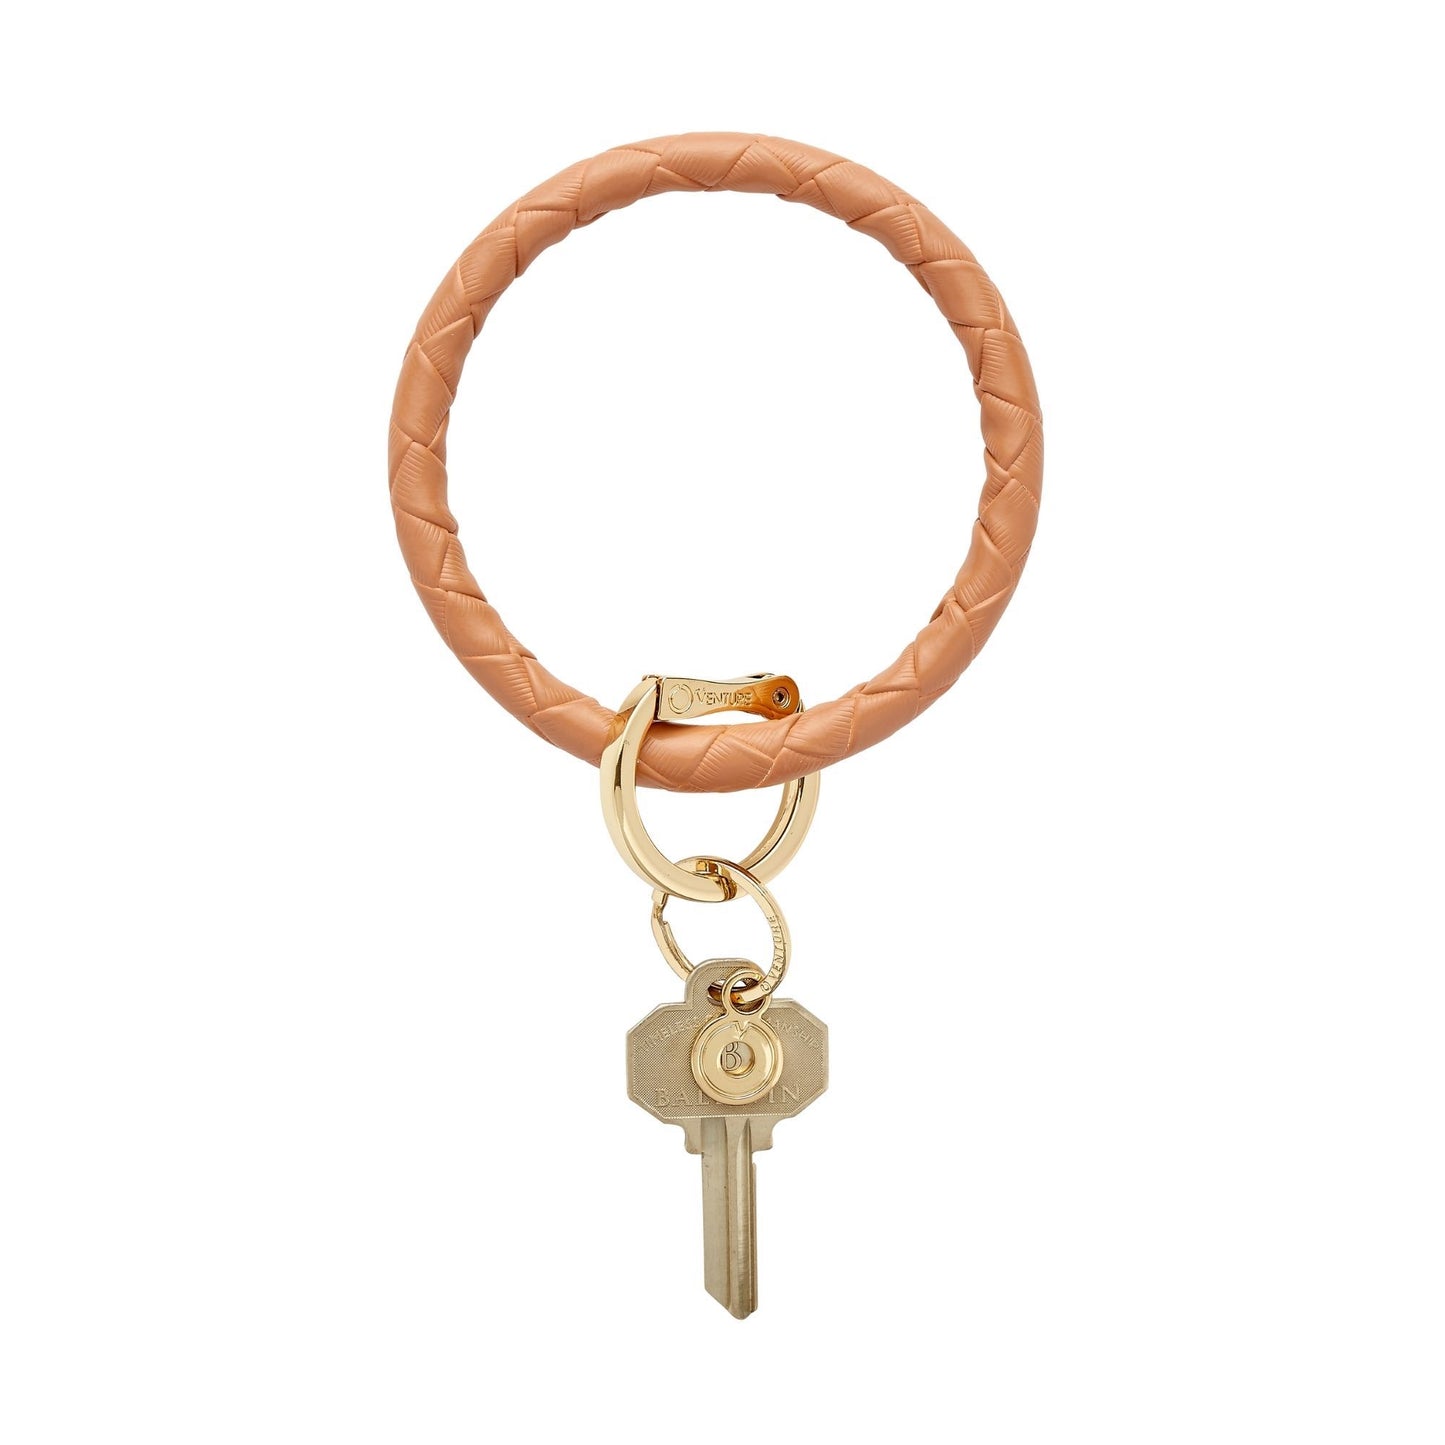 In The Saddle Basketweave - Woven Leather Big O Key Ring